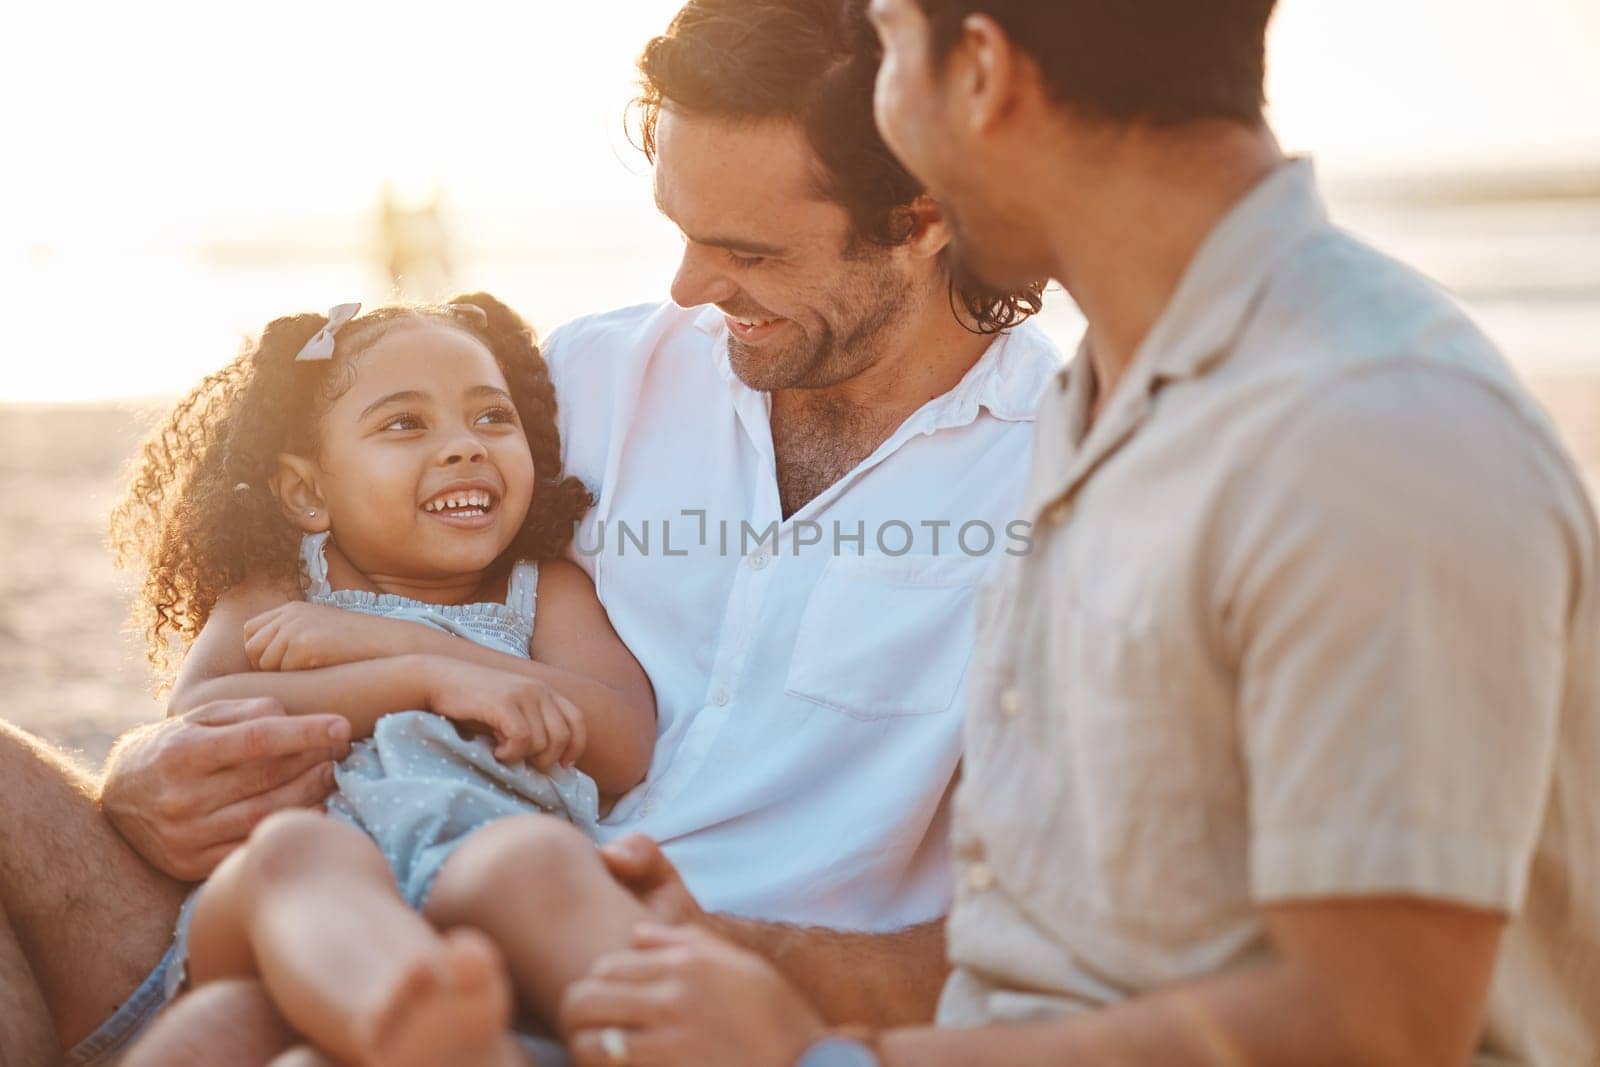 Gay couple, funny and relax with family at beach for seaside holiday, support and travel. Summer, vacation and love with men and child laughing in nature for lgbtq, happiness and bonding together.